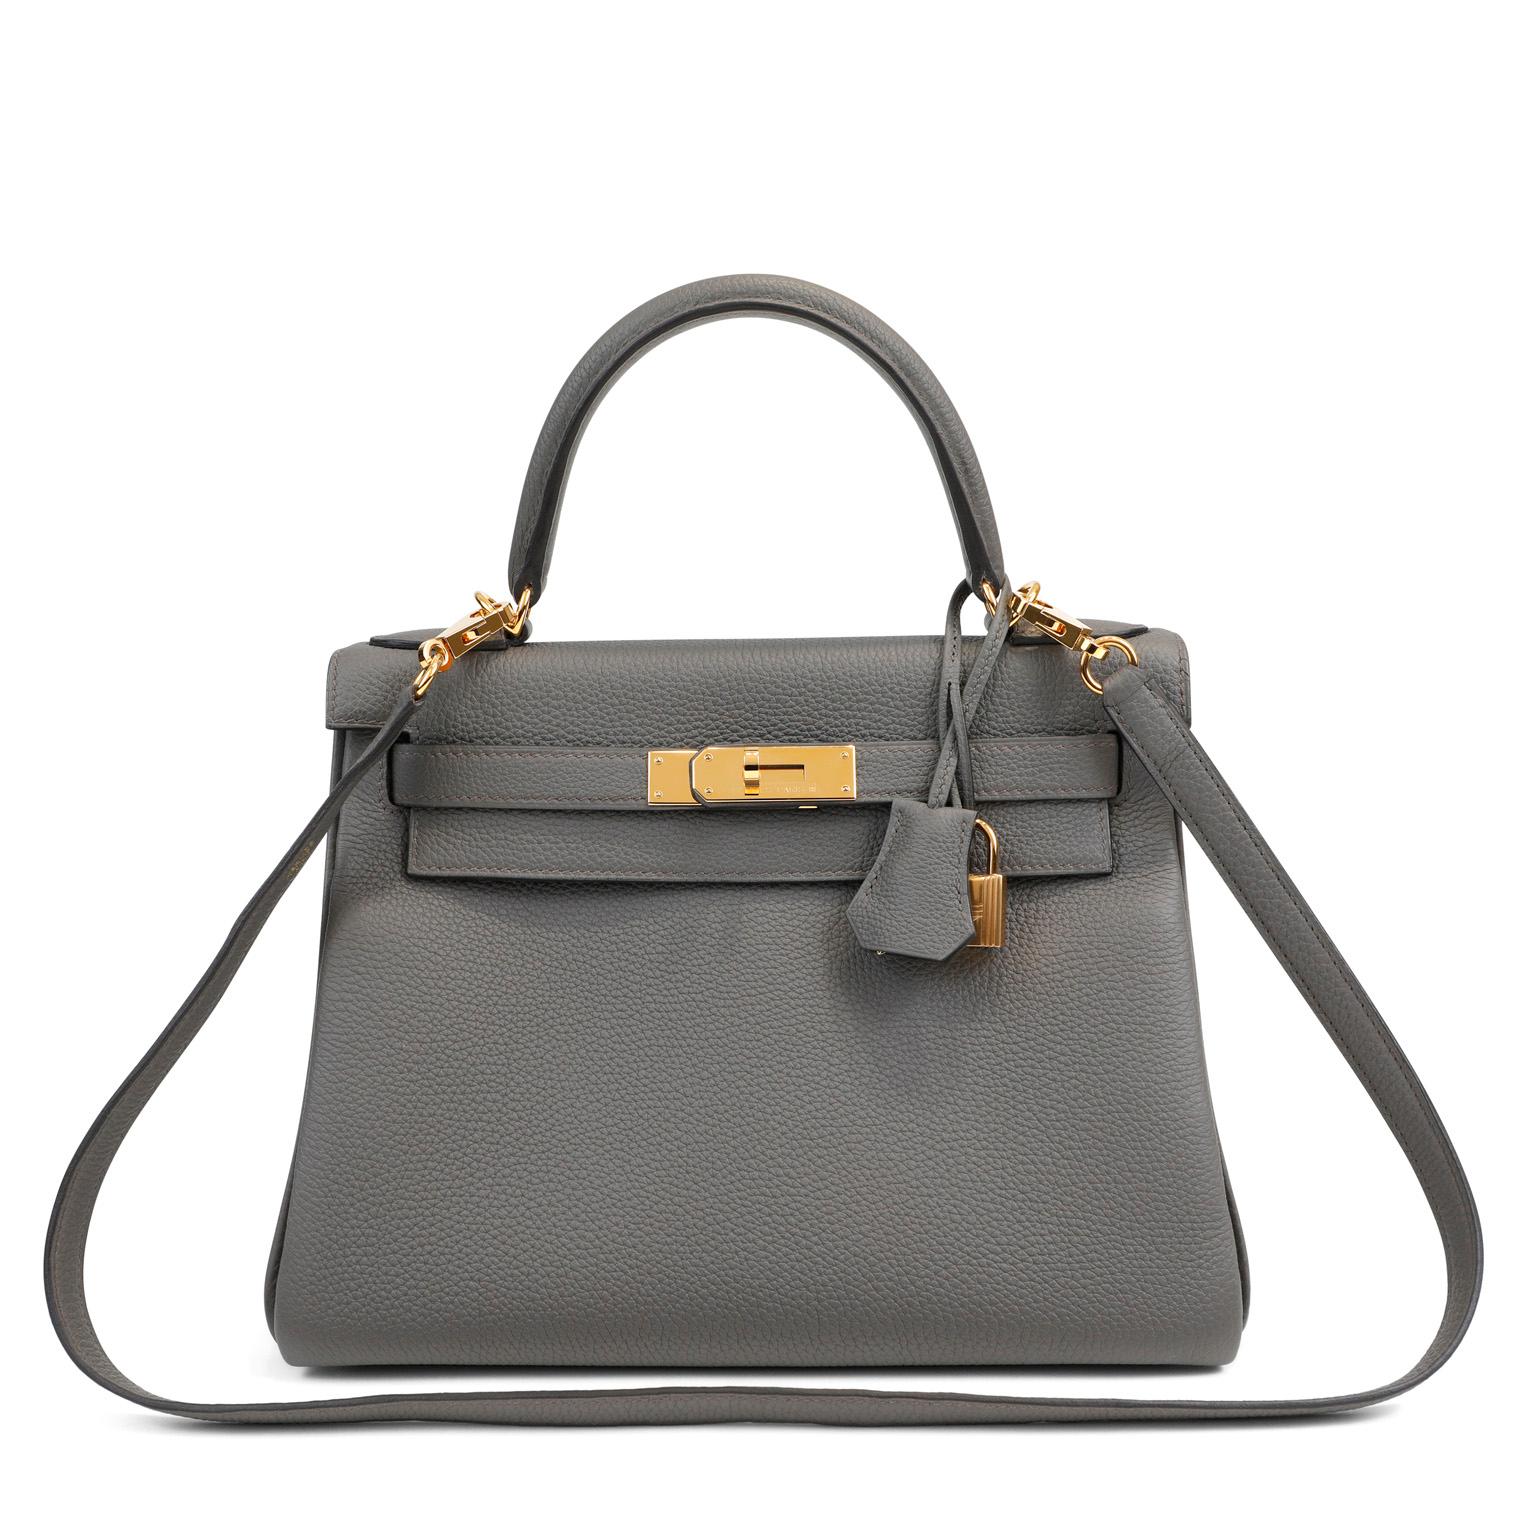 Gray Hermès Grey Togo Leather 28 cm Kelly with Gold Hardware